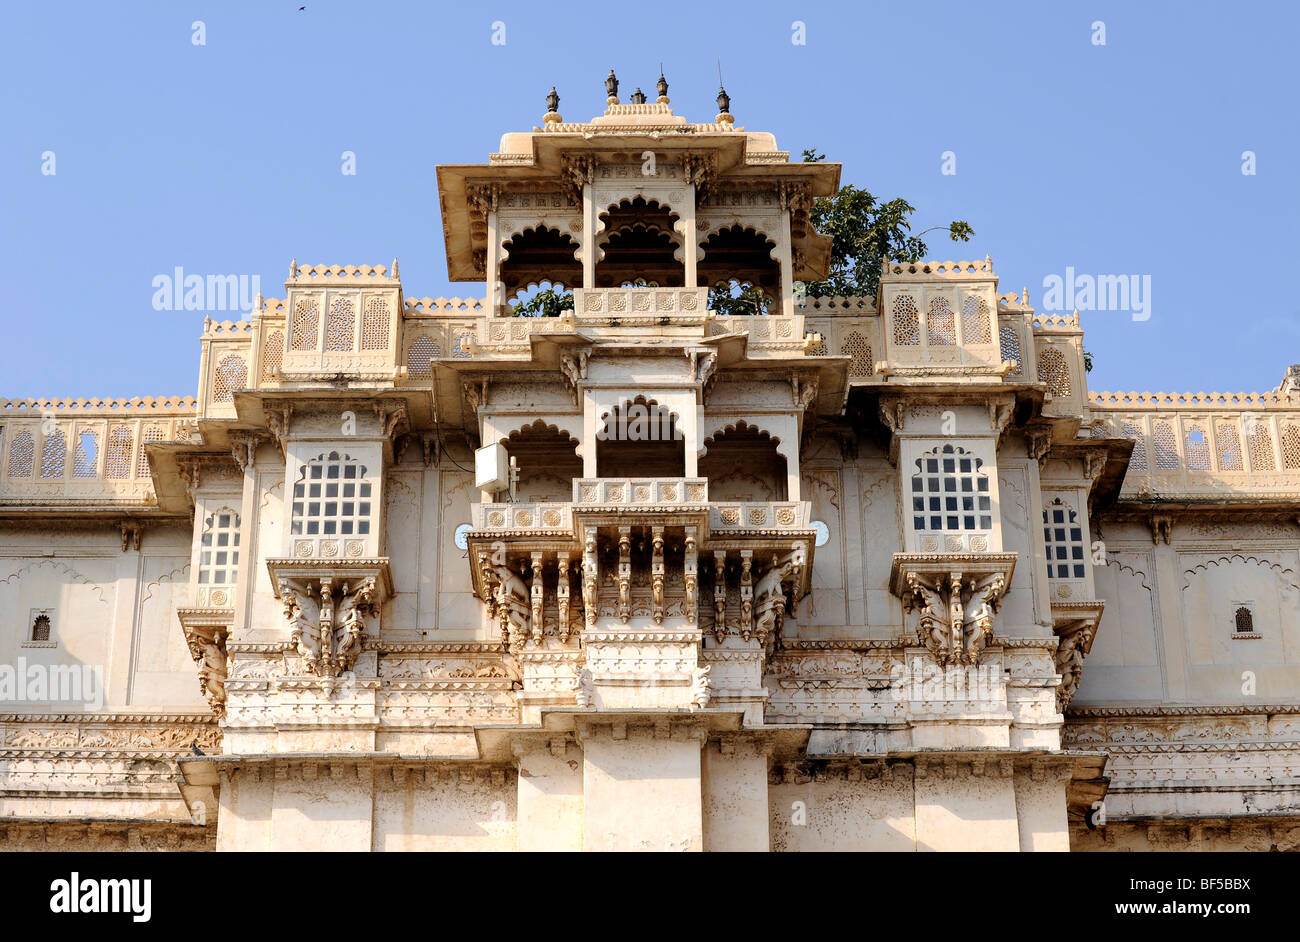 City palace of Udaipur, exterior, detail, Udaipur, Rajasthan, North India, India, South Asia, Asia Stock Photo